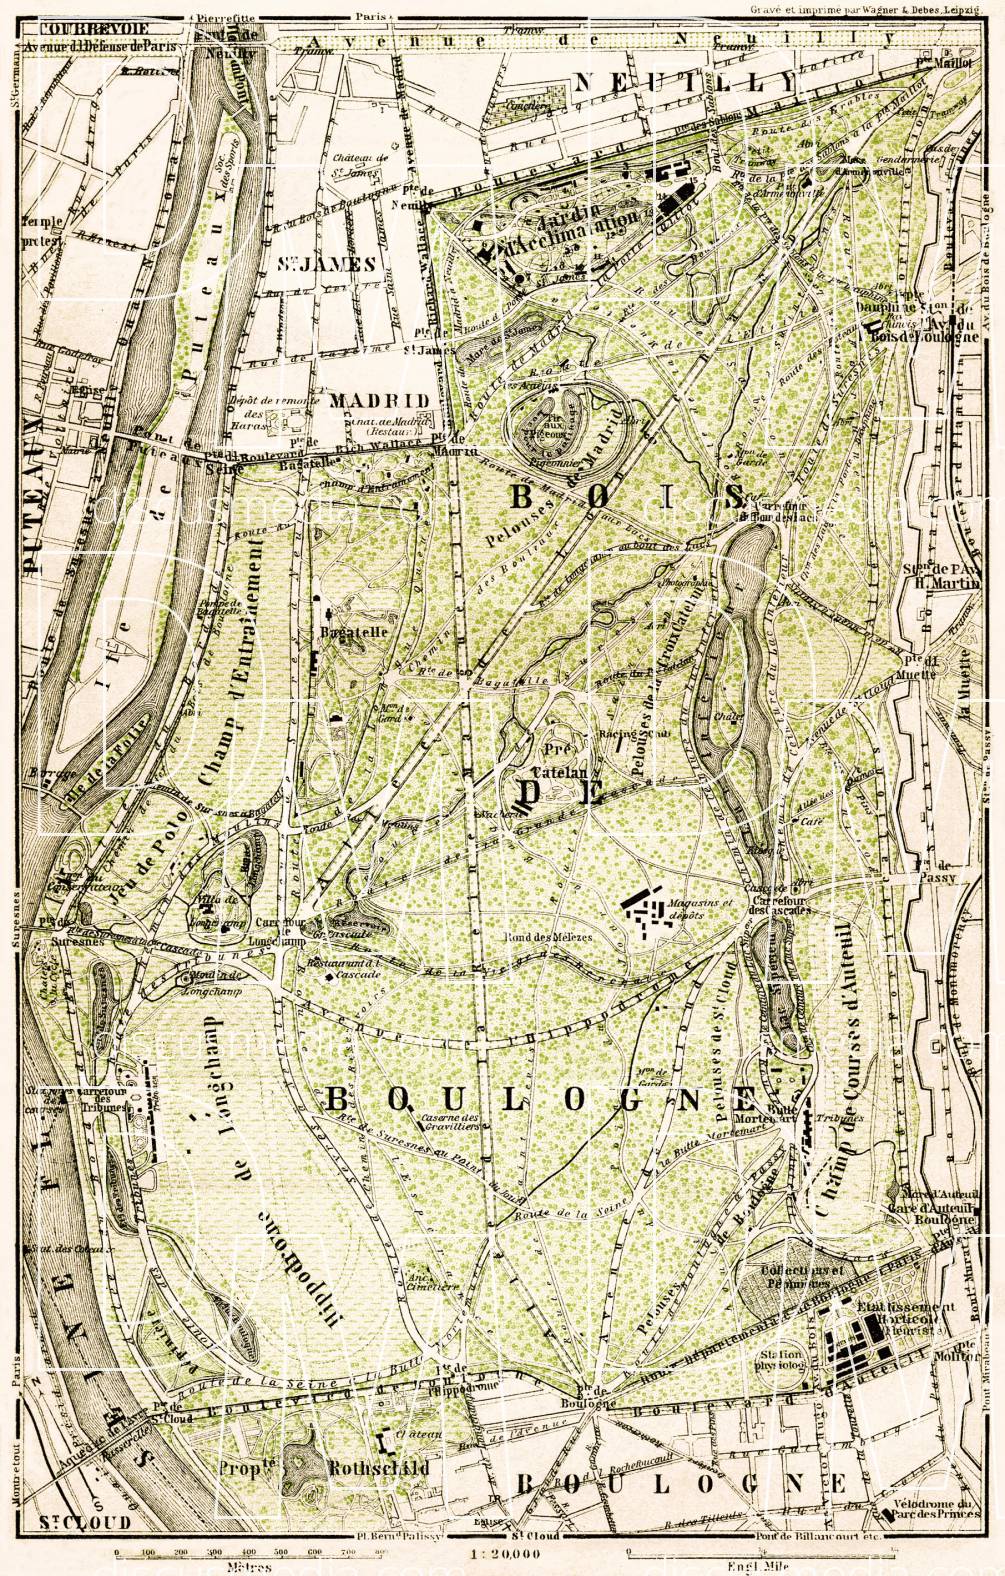 Old map of Bois de Boulogne in 1903. Buy vintage map replica poster ...